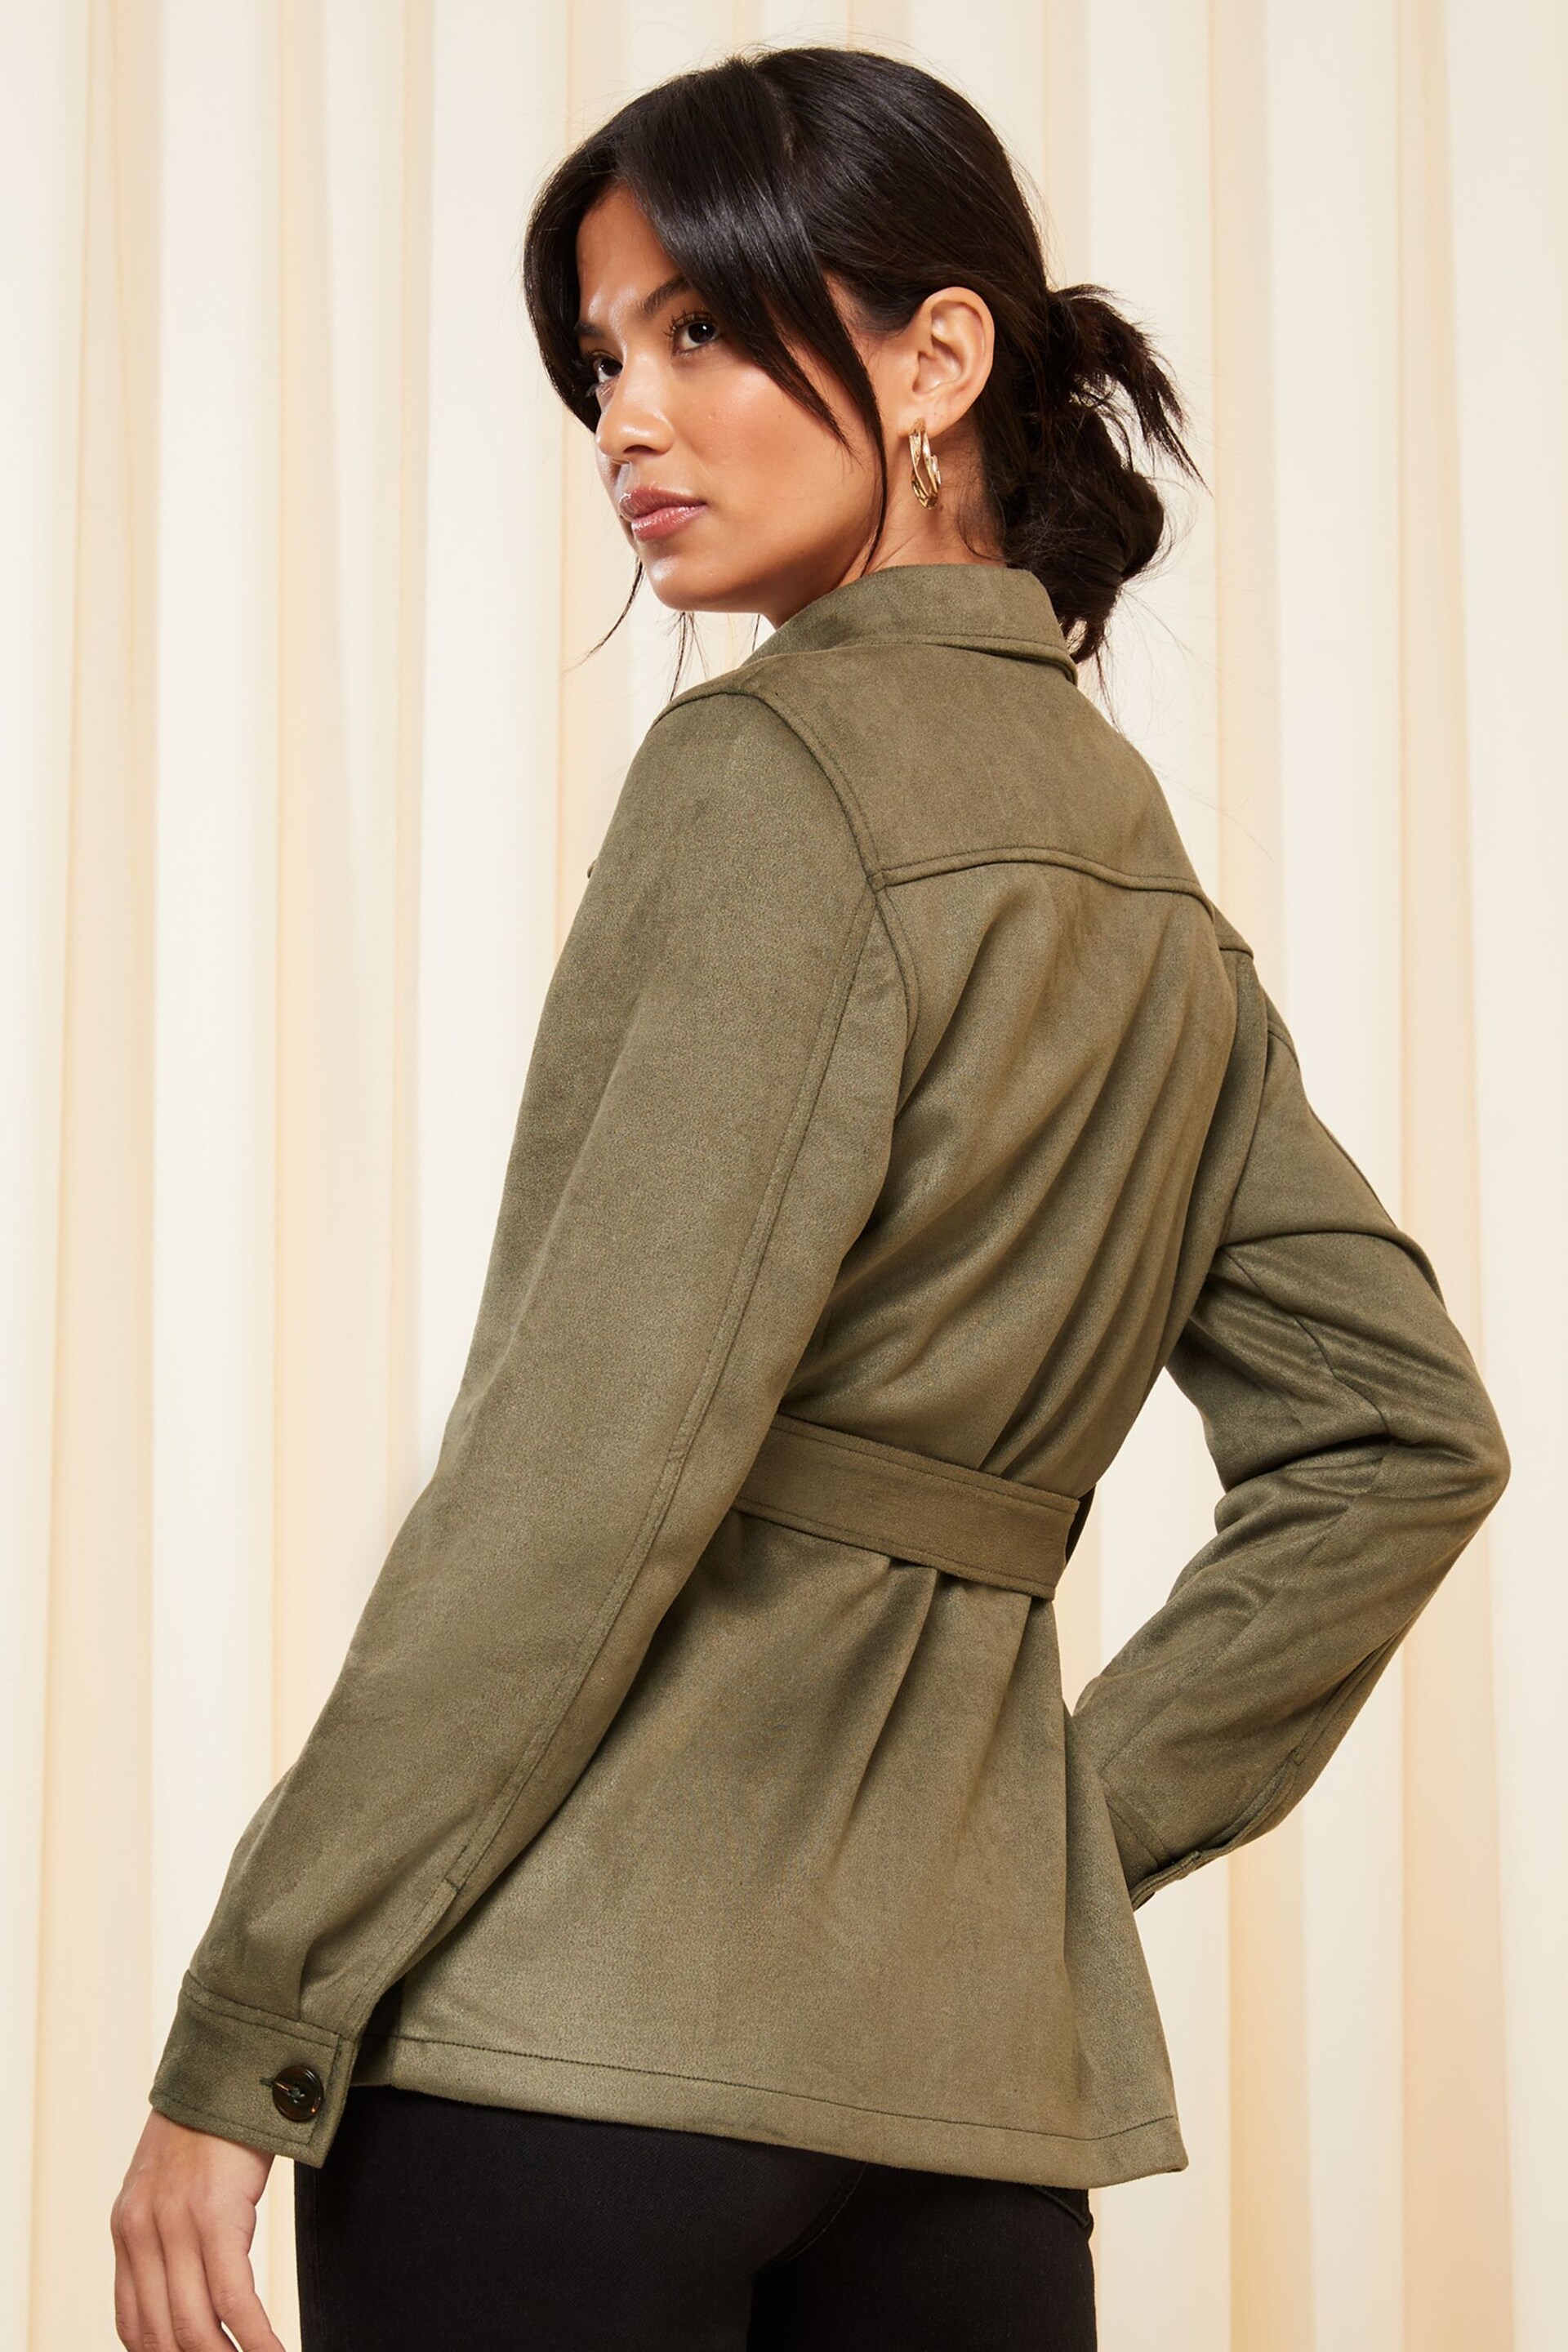 Friends Like These Khaki Green Faux Suede Belted Shirt Jacket - Image 4 of 4